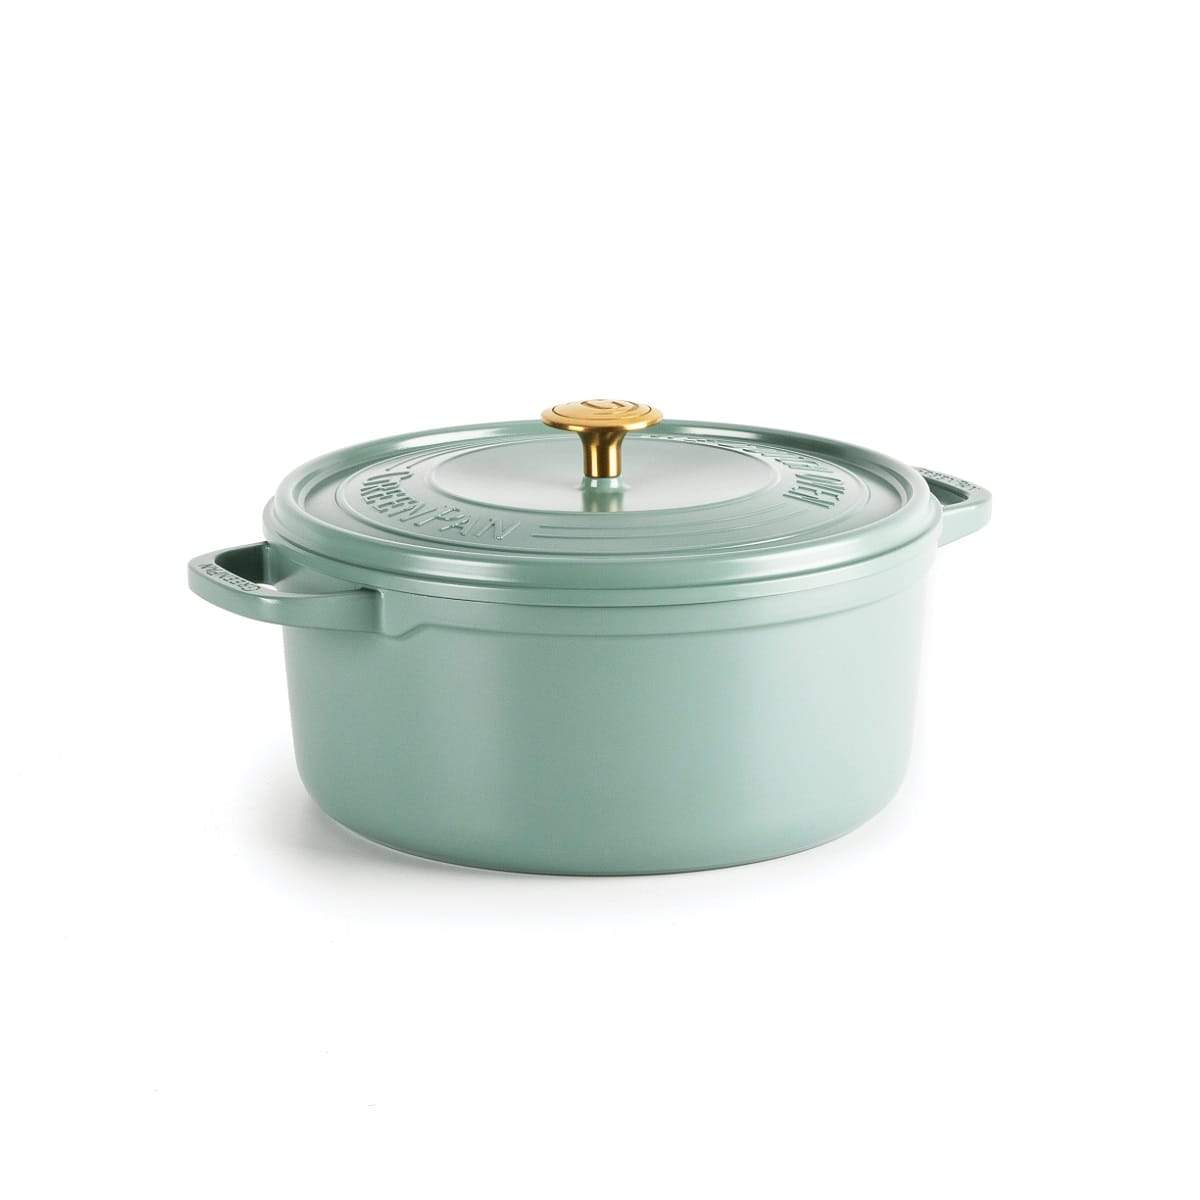 CC005543-001 - Featherweights Casserole with Lid, Smokey Sky Blue - 28cm - Product Image 1